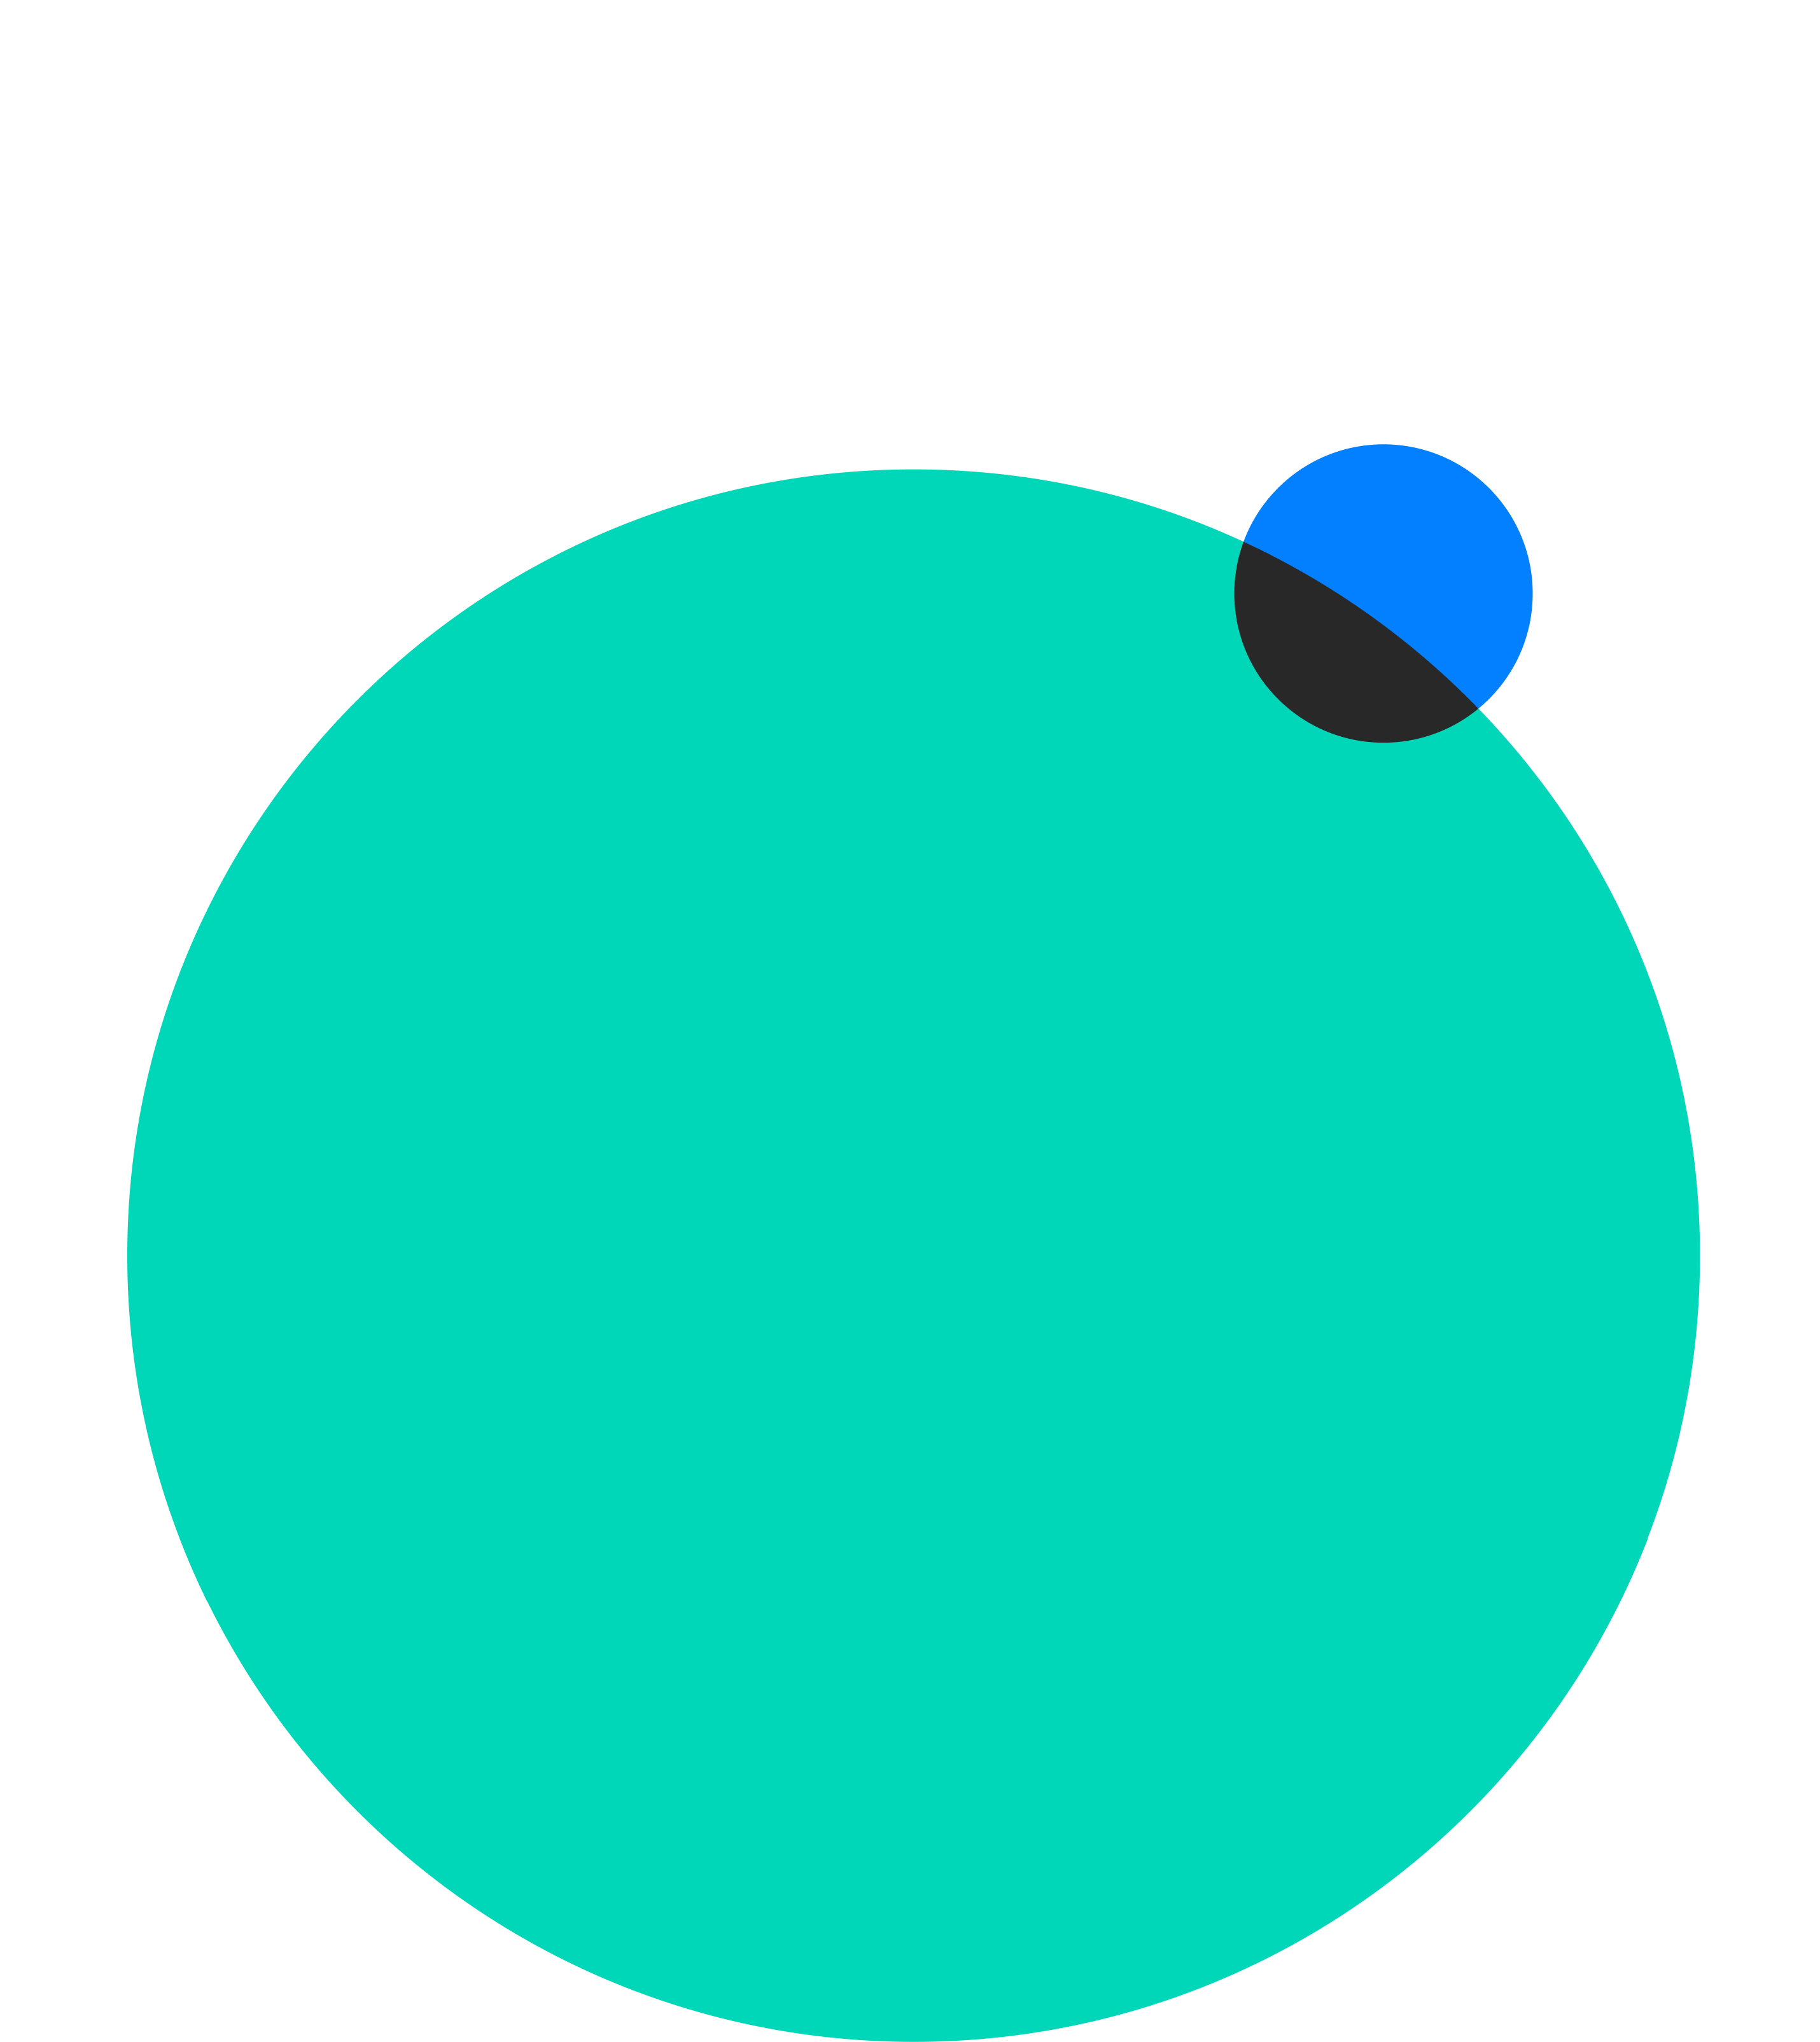 Abstract illustration of two overlapping circles